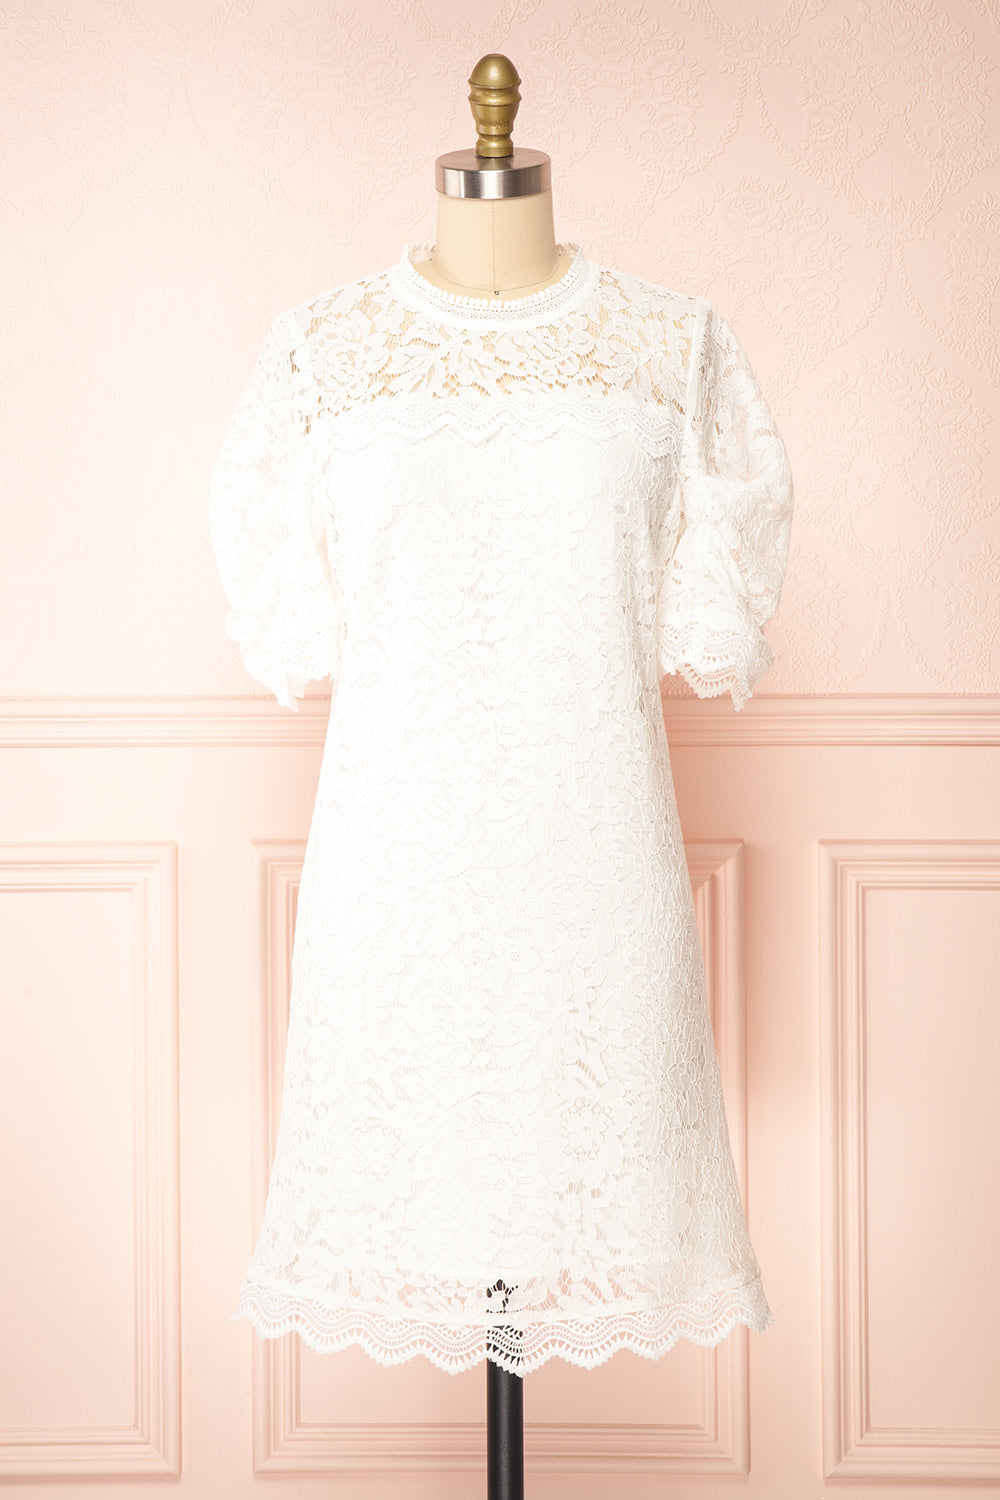 Lelesmi White Short Sleeve Lace Dress w/ Round Collar | Boutique 1861 front view 